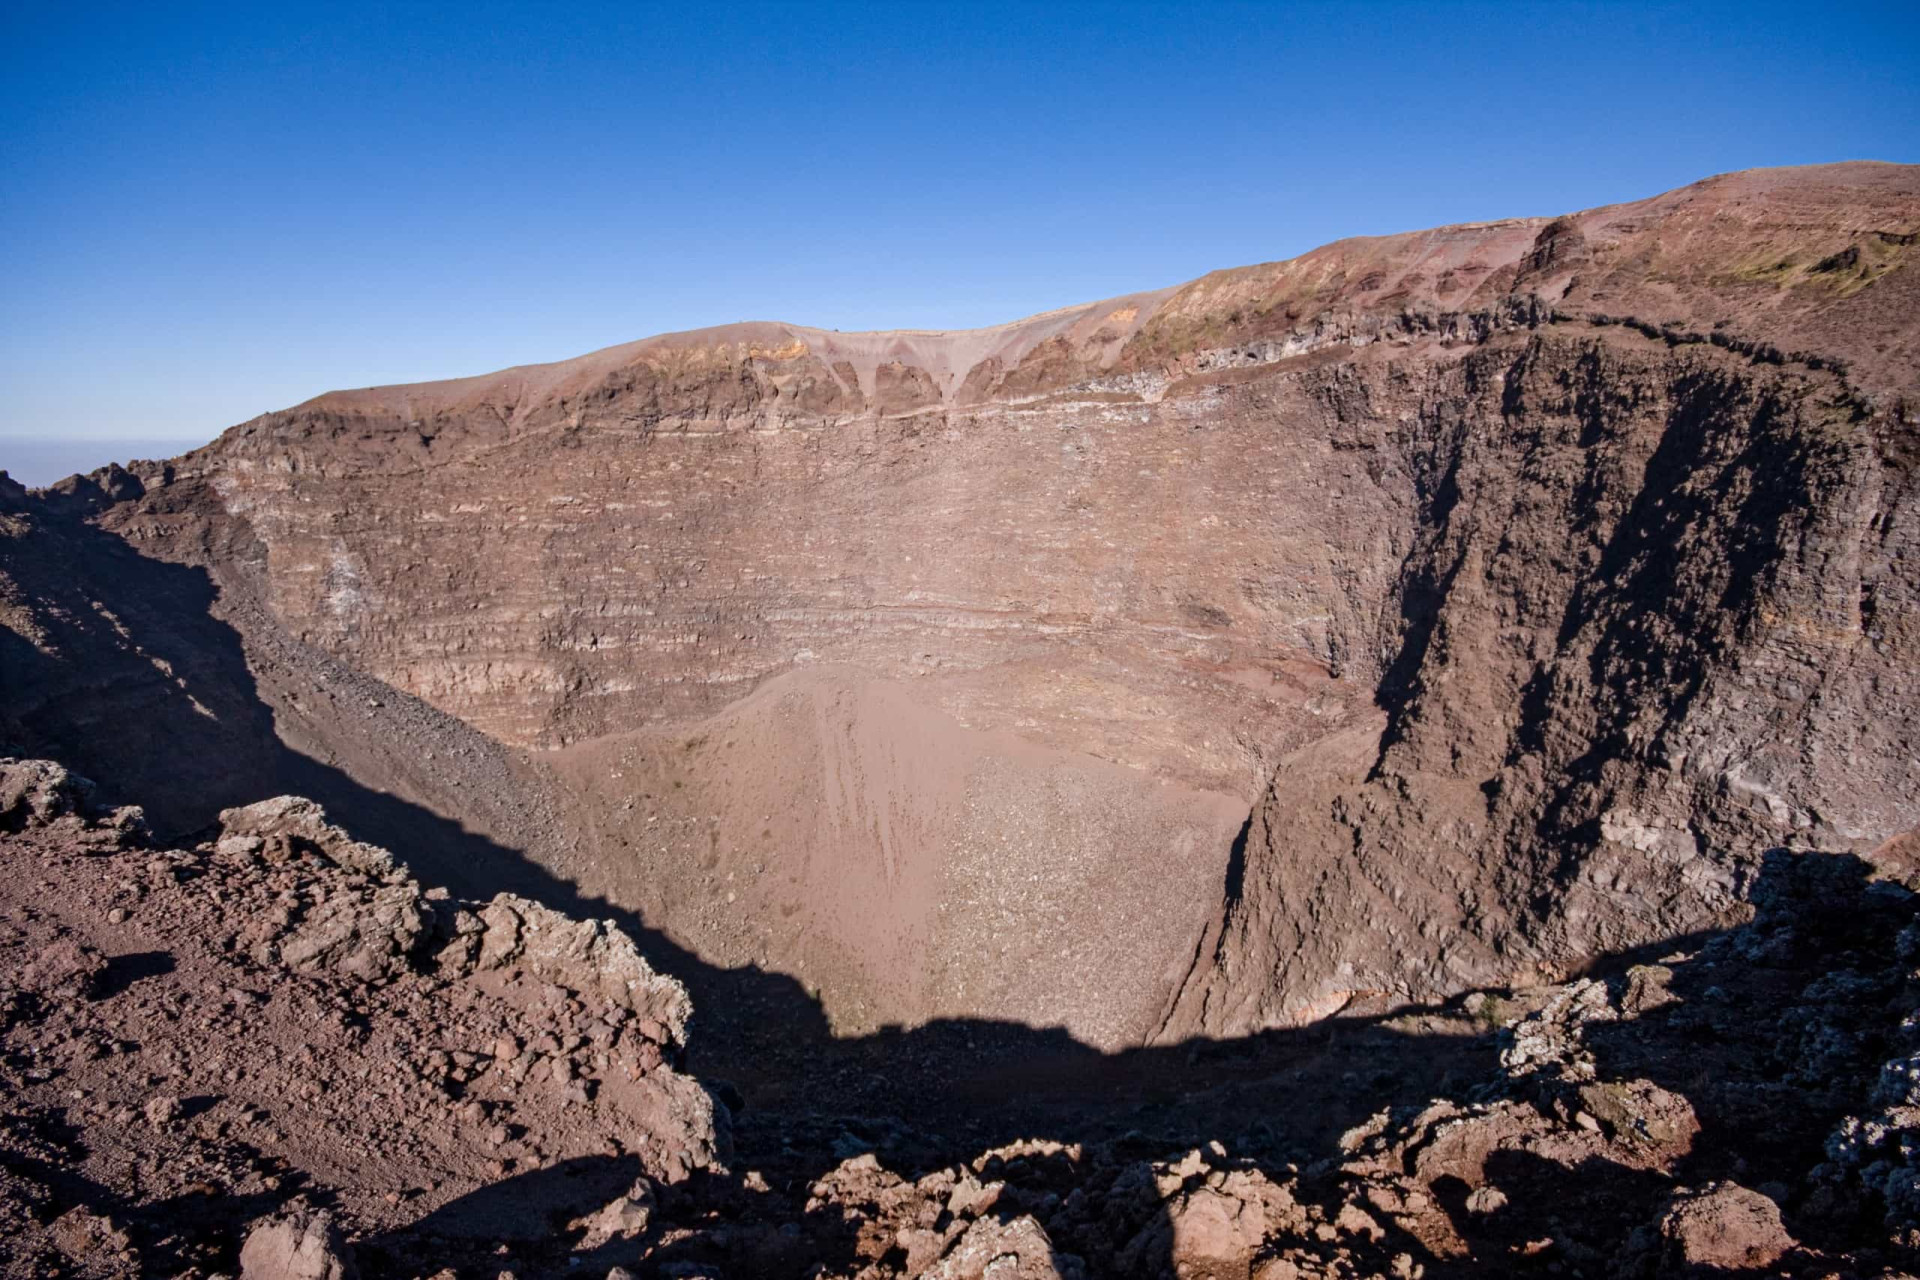 There aren't many restrictions on how up close and personal you can get with Vesuvius. Just make sure you don't fall in!<p><a href="https://www.msn.com/en-us/community/channel/vid-7xx8mnucu55yw63we9va2gwr7uihbxwc68fxqp25x6tg4ftibpra?cvid=94631541bc0f4f89bfd59158d696ad7e">Follow us and access great exclusive content every day</a></p>